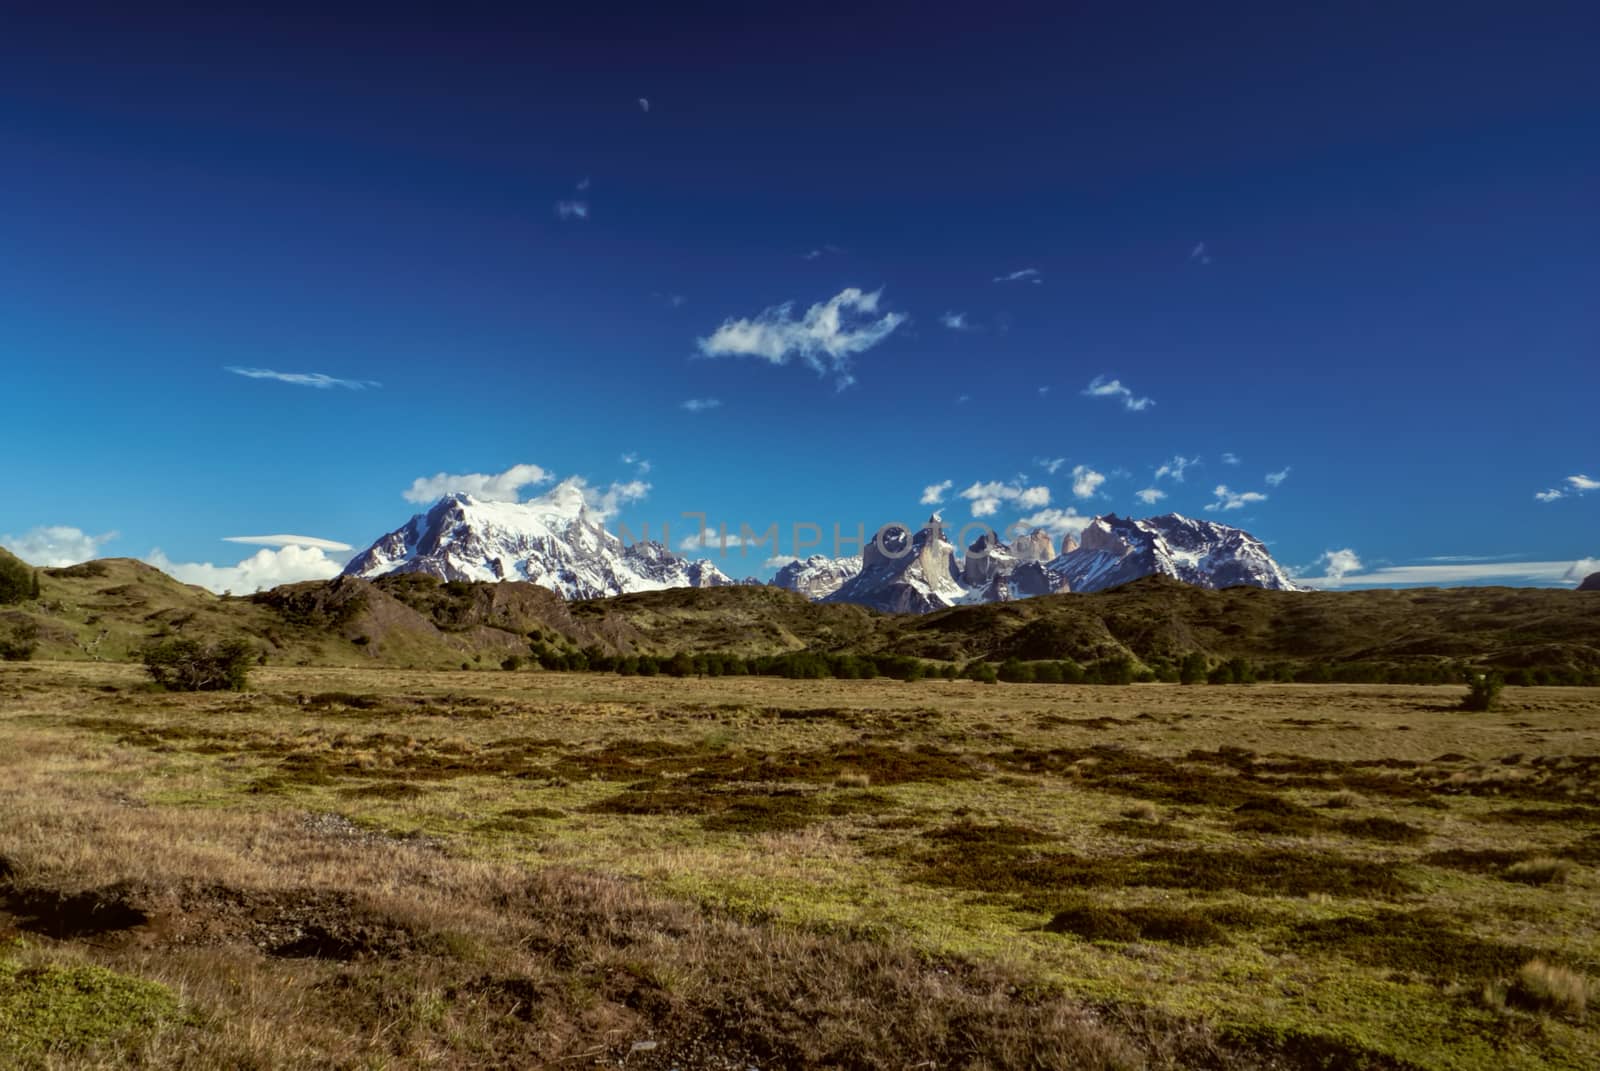 Scenic view of snowy peaks and grassy meadows in Torres del Paine National Park